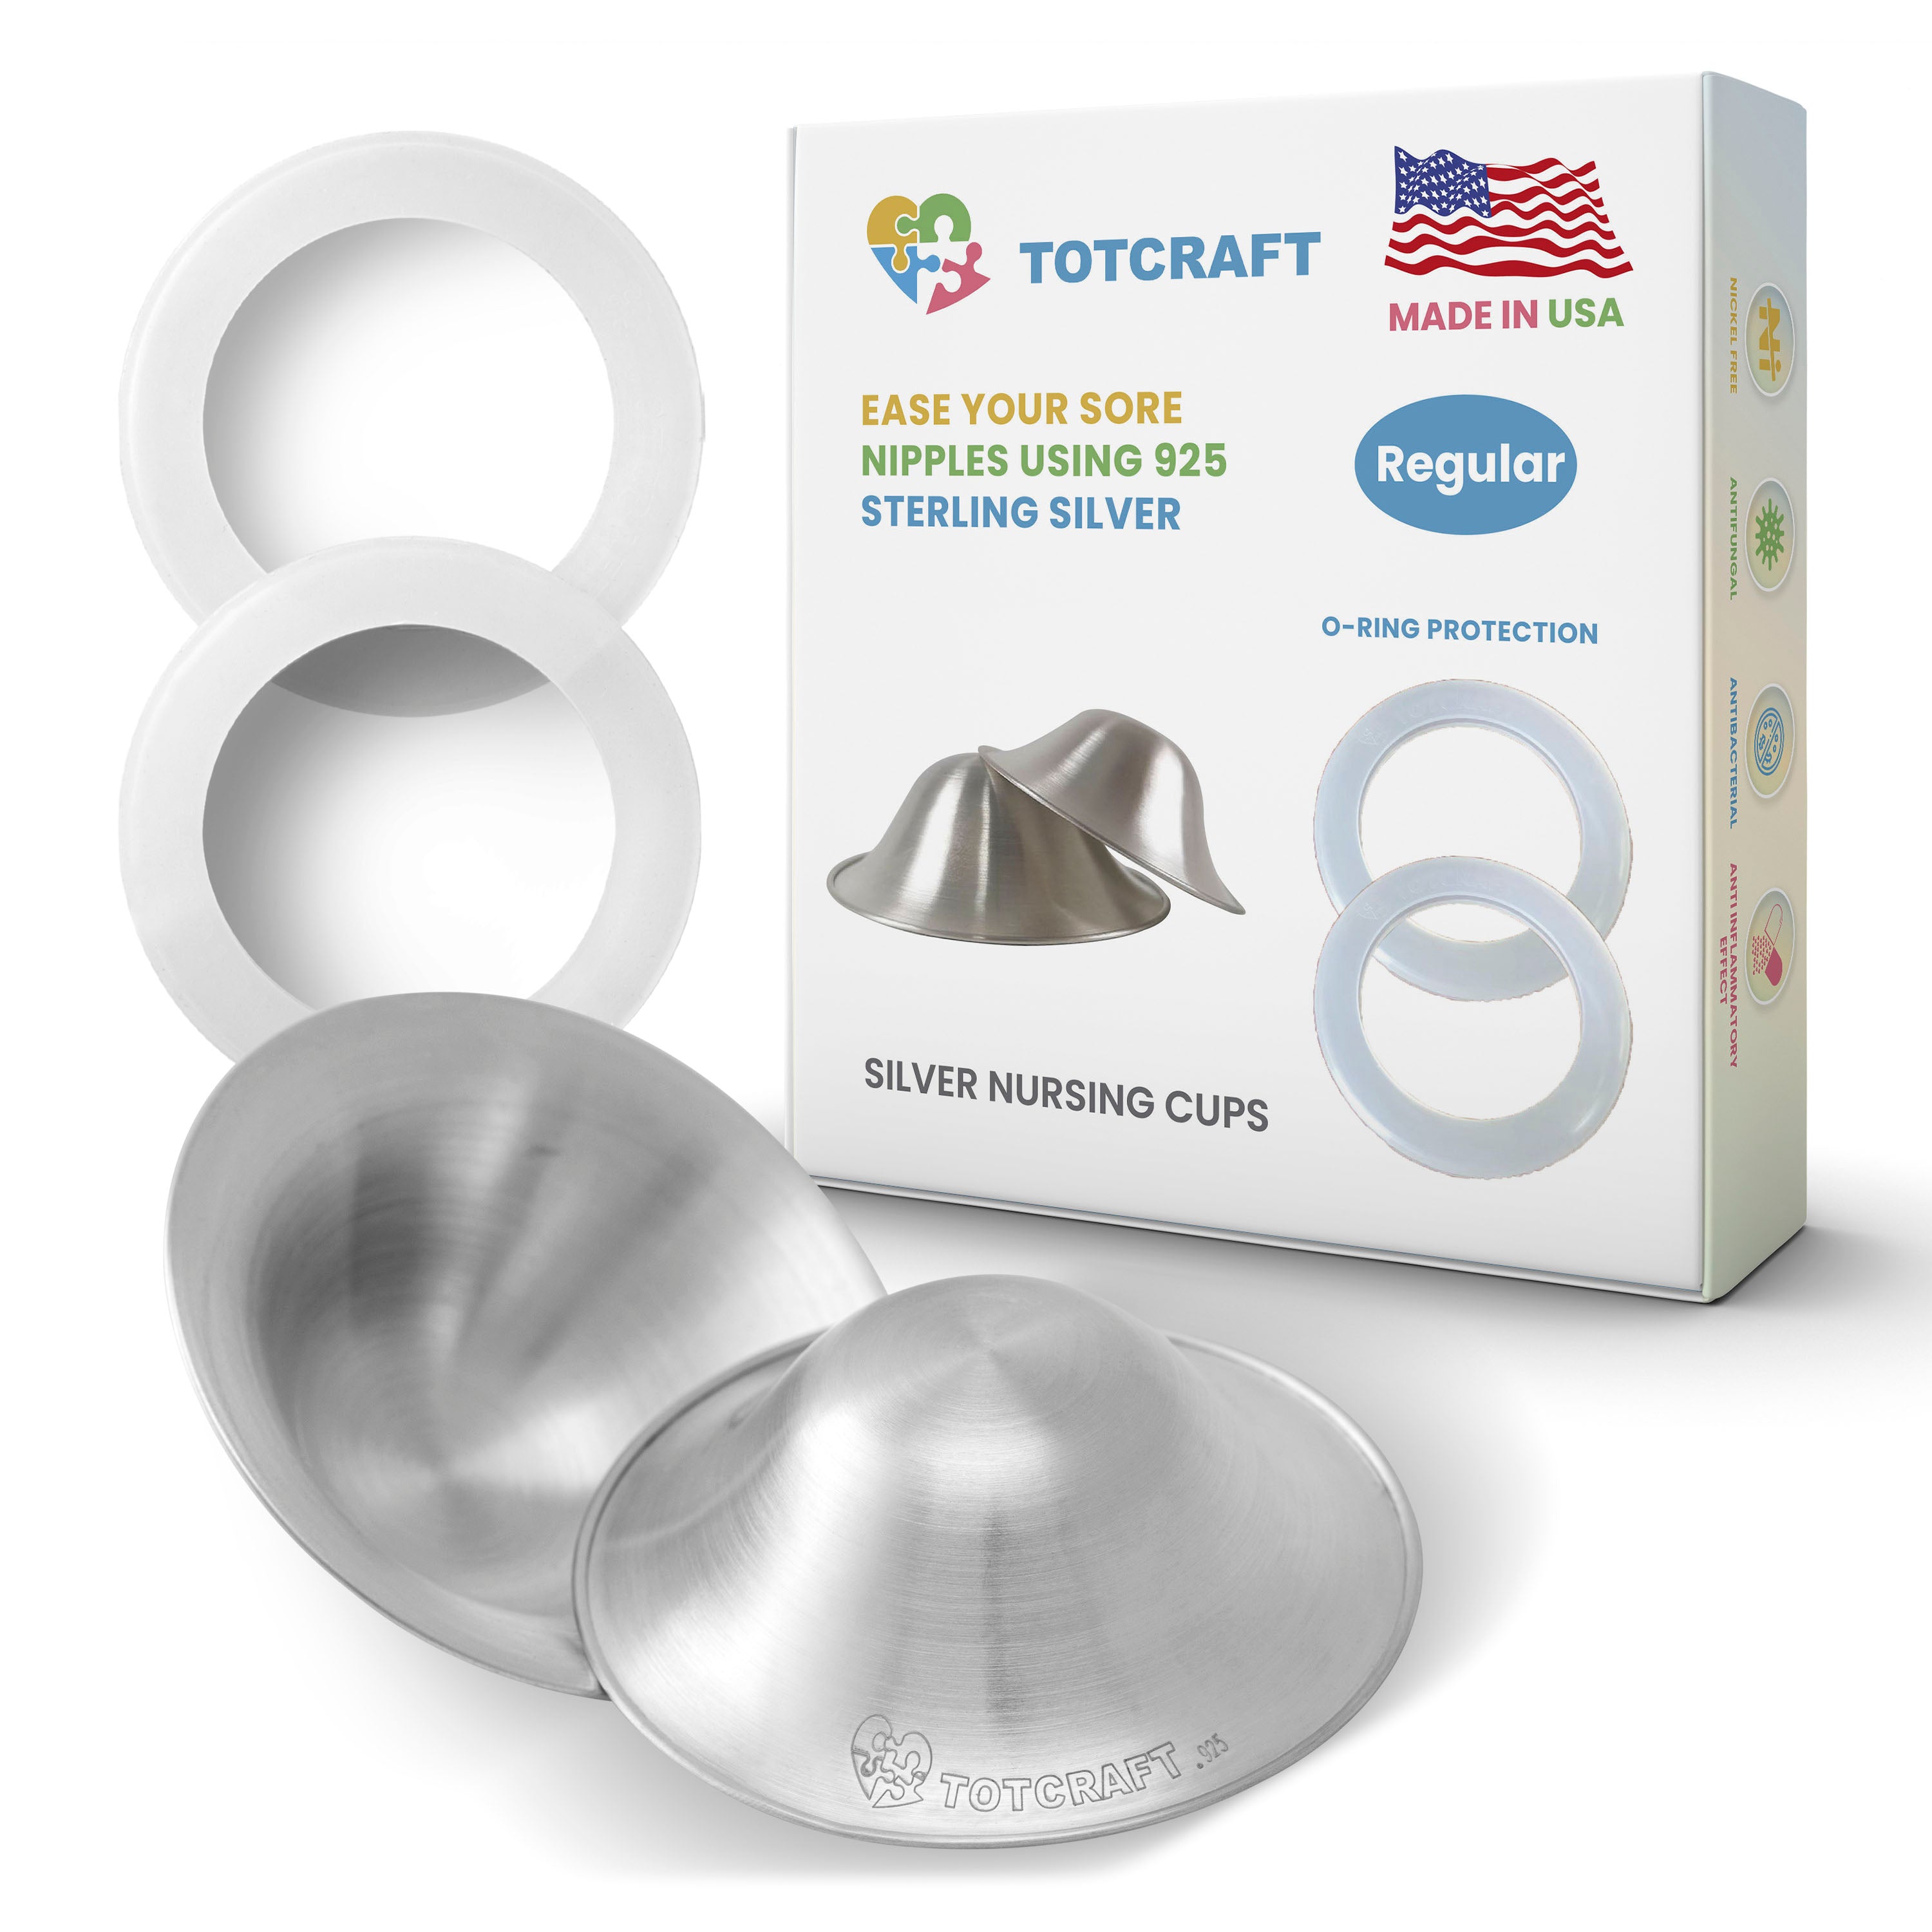 the Original Silver Nursing Cups, s Metal Nipple Covers for